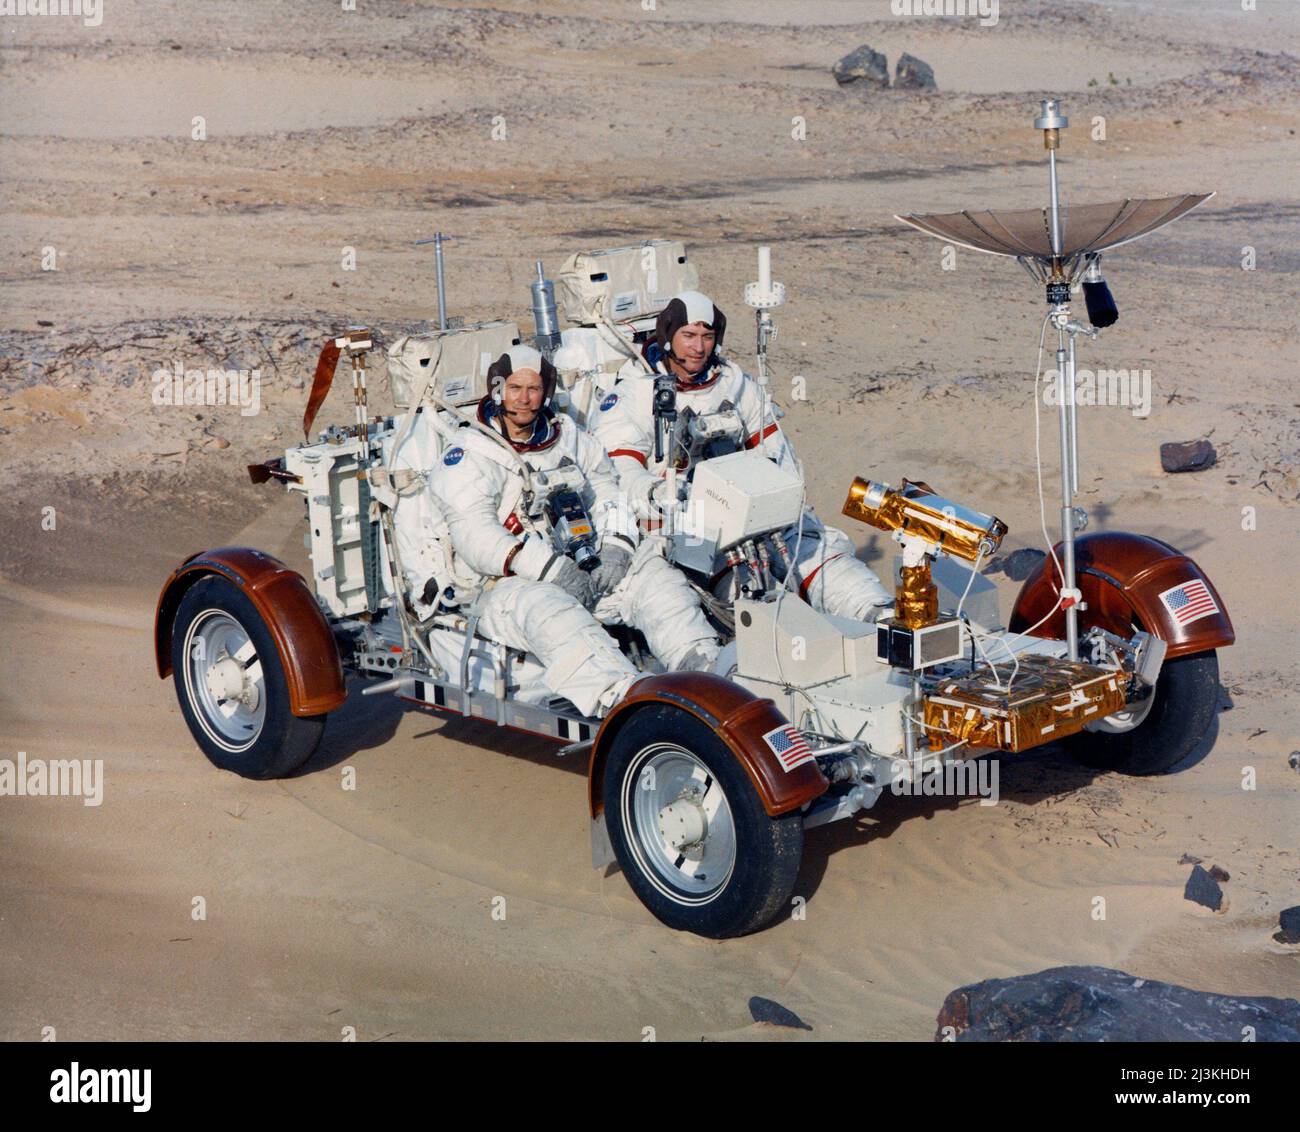 Apollo 16 astronauts John Young (right), and Charles Duke, maneuver a training version of the lunar roving vehicle about a field at the Kennedy Space Center simulated to represent the lunar surface Stock Photo